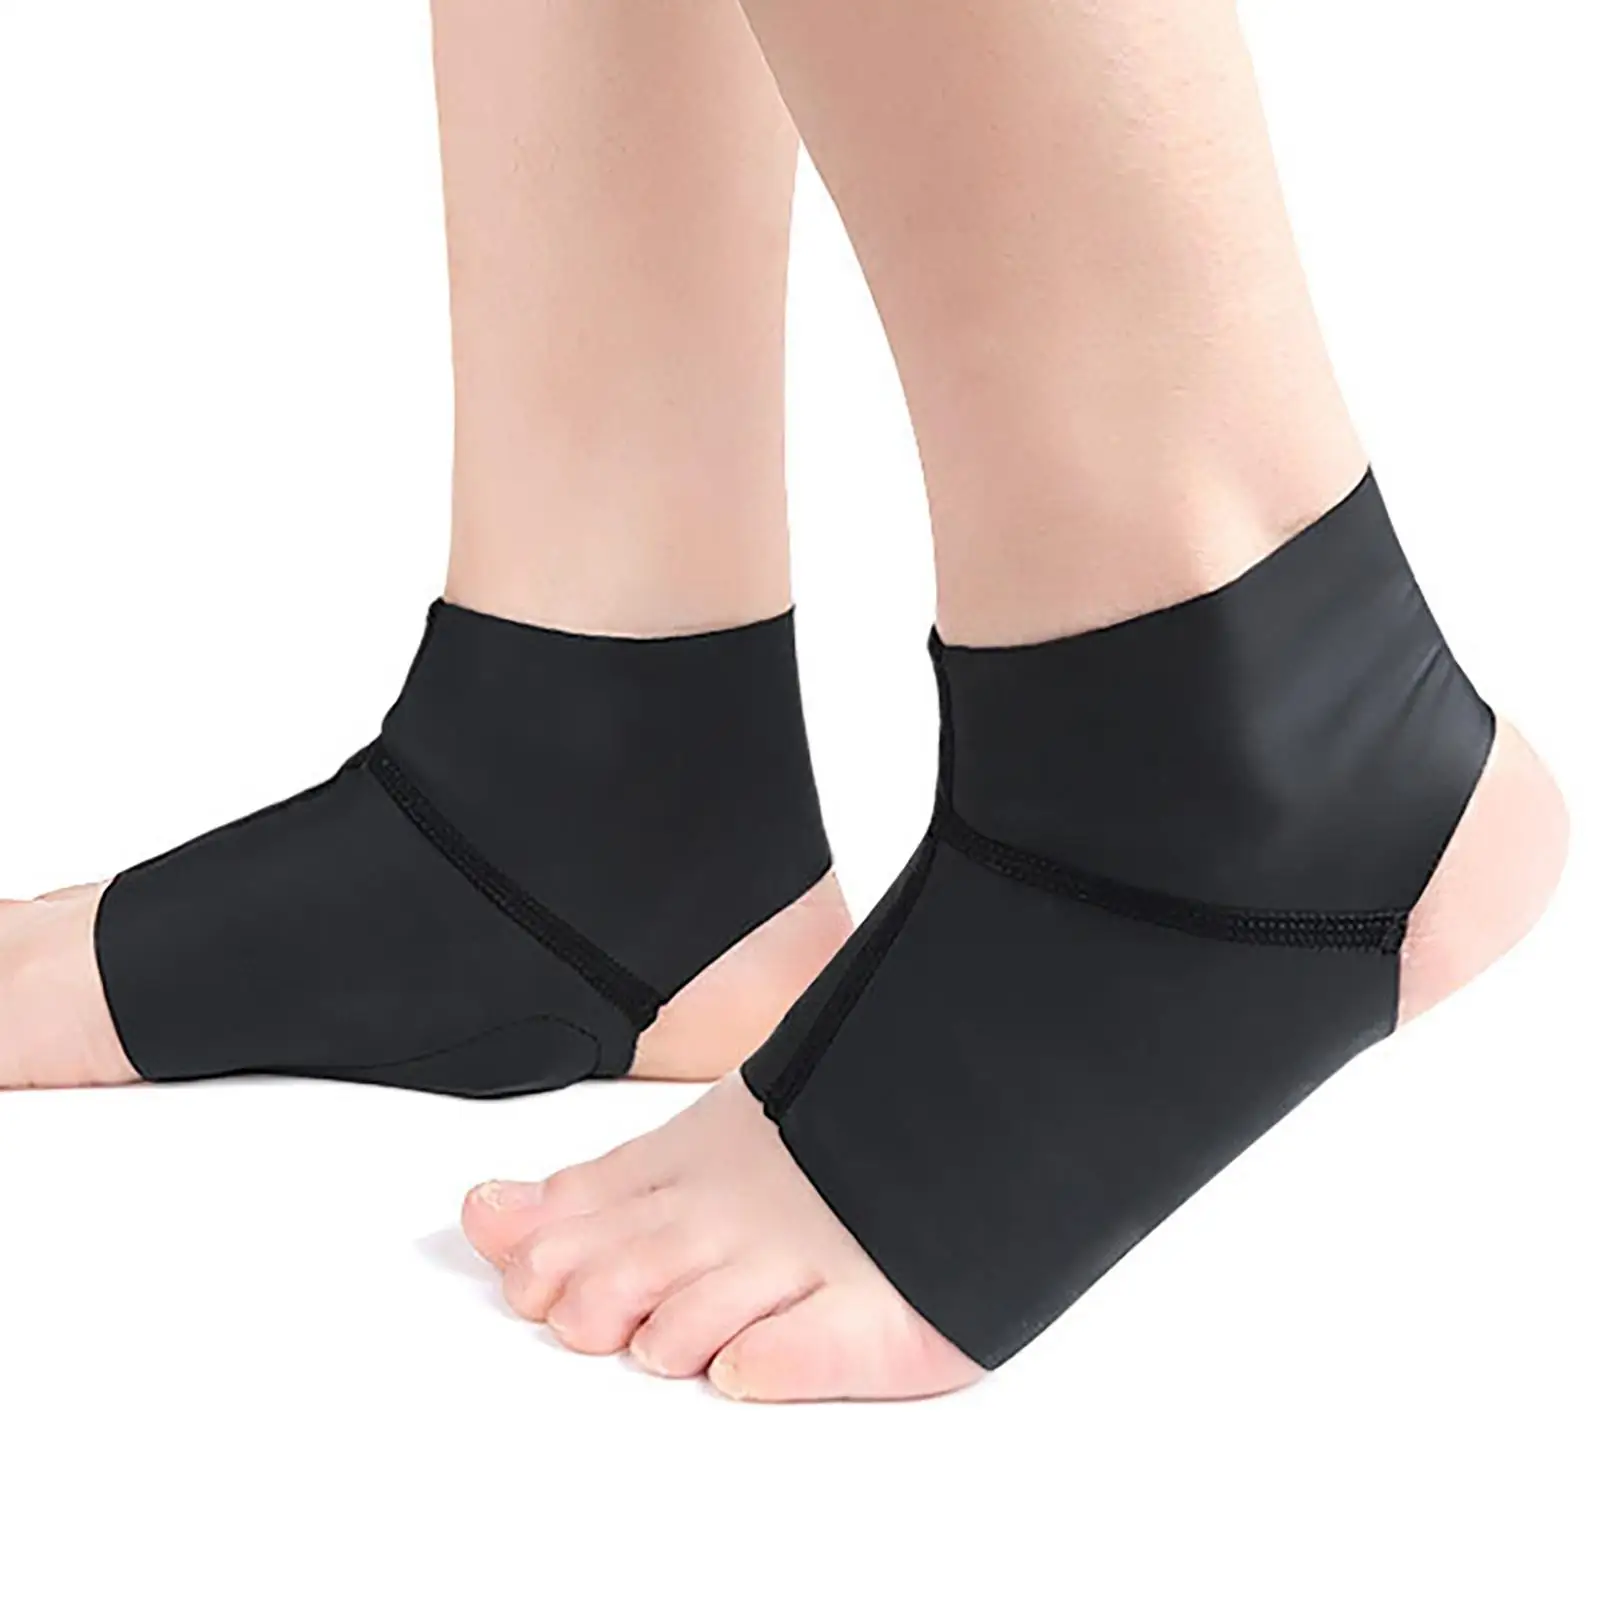 2x Arch Support Foot Pad Breathable Durable Professional Washable Orthopedic  Ankle Compression  Sports ,Flat Feet, Men Women